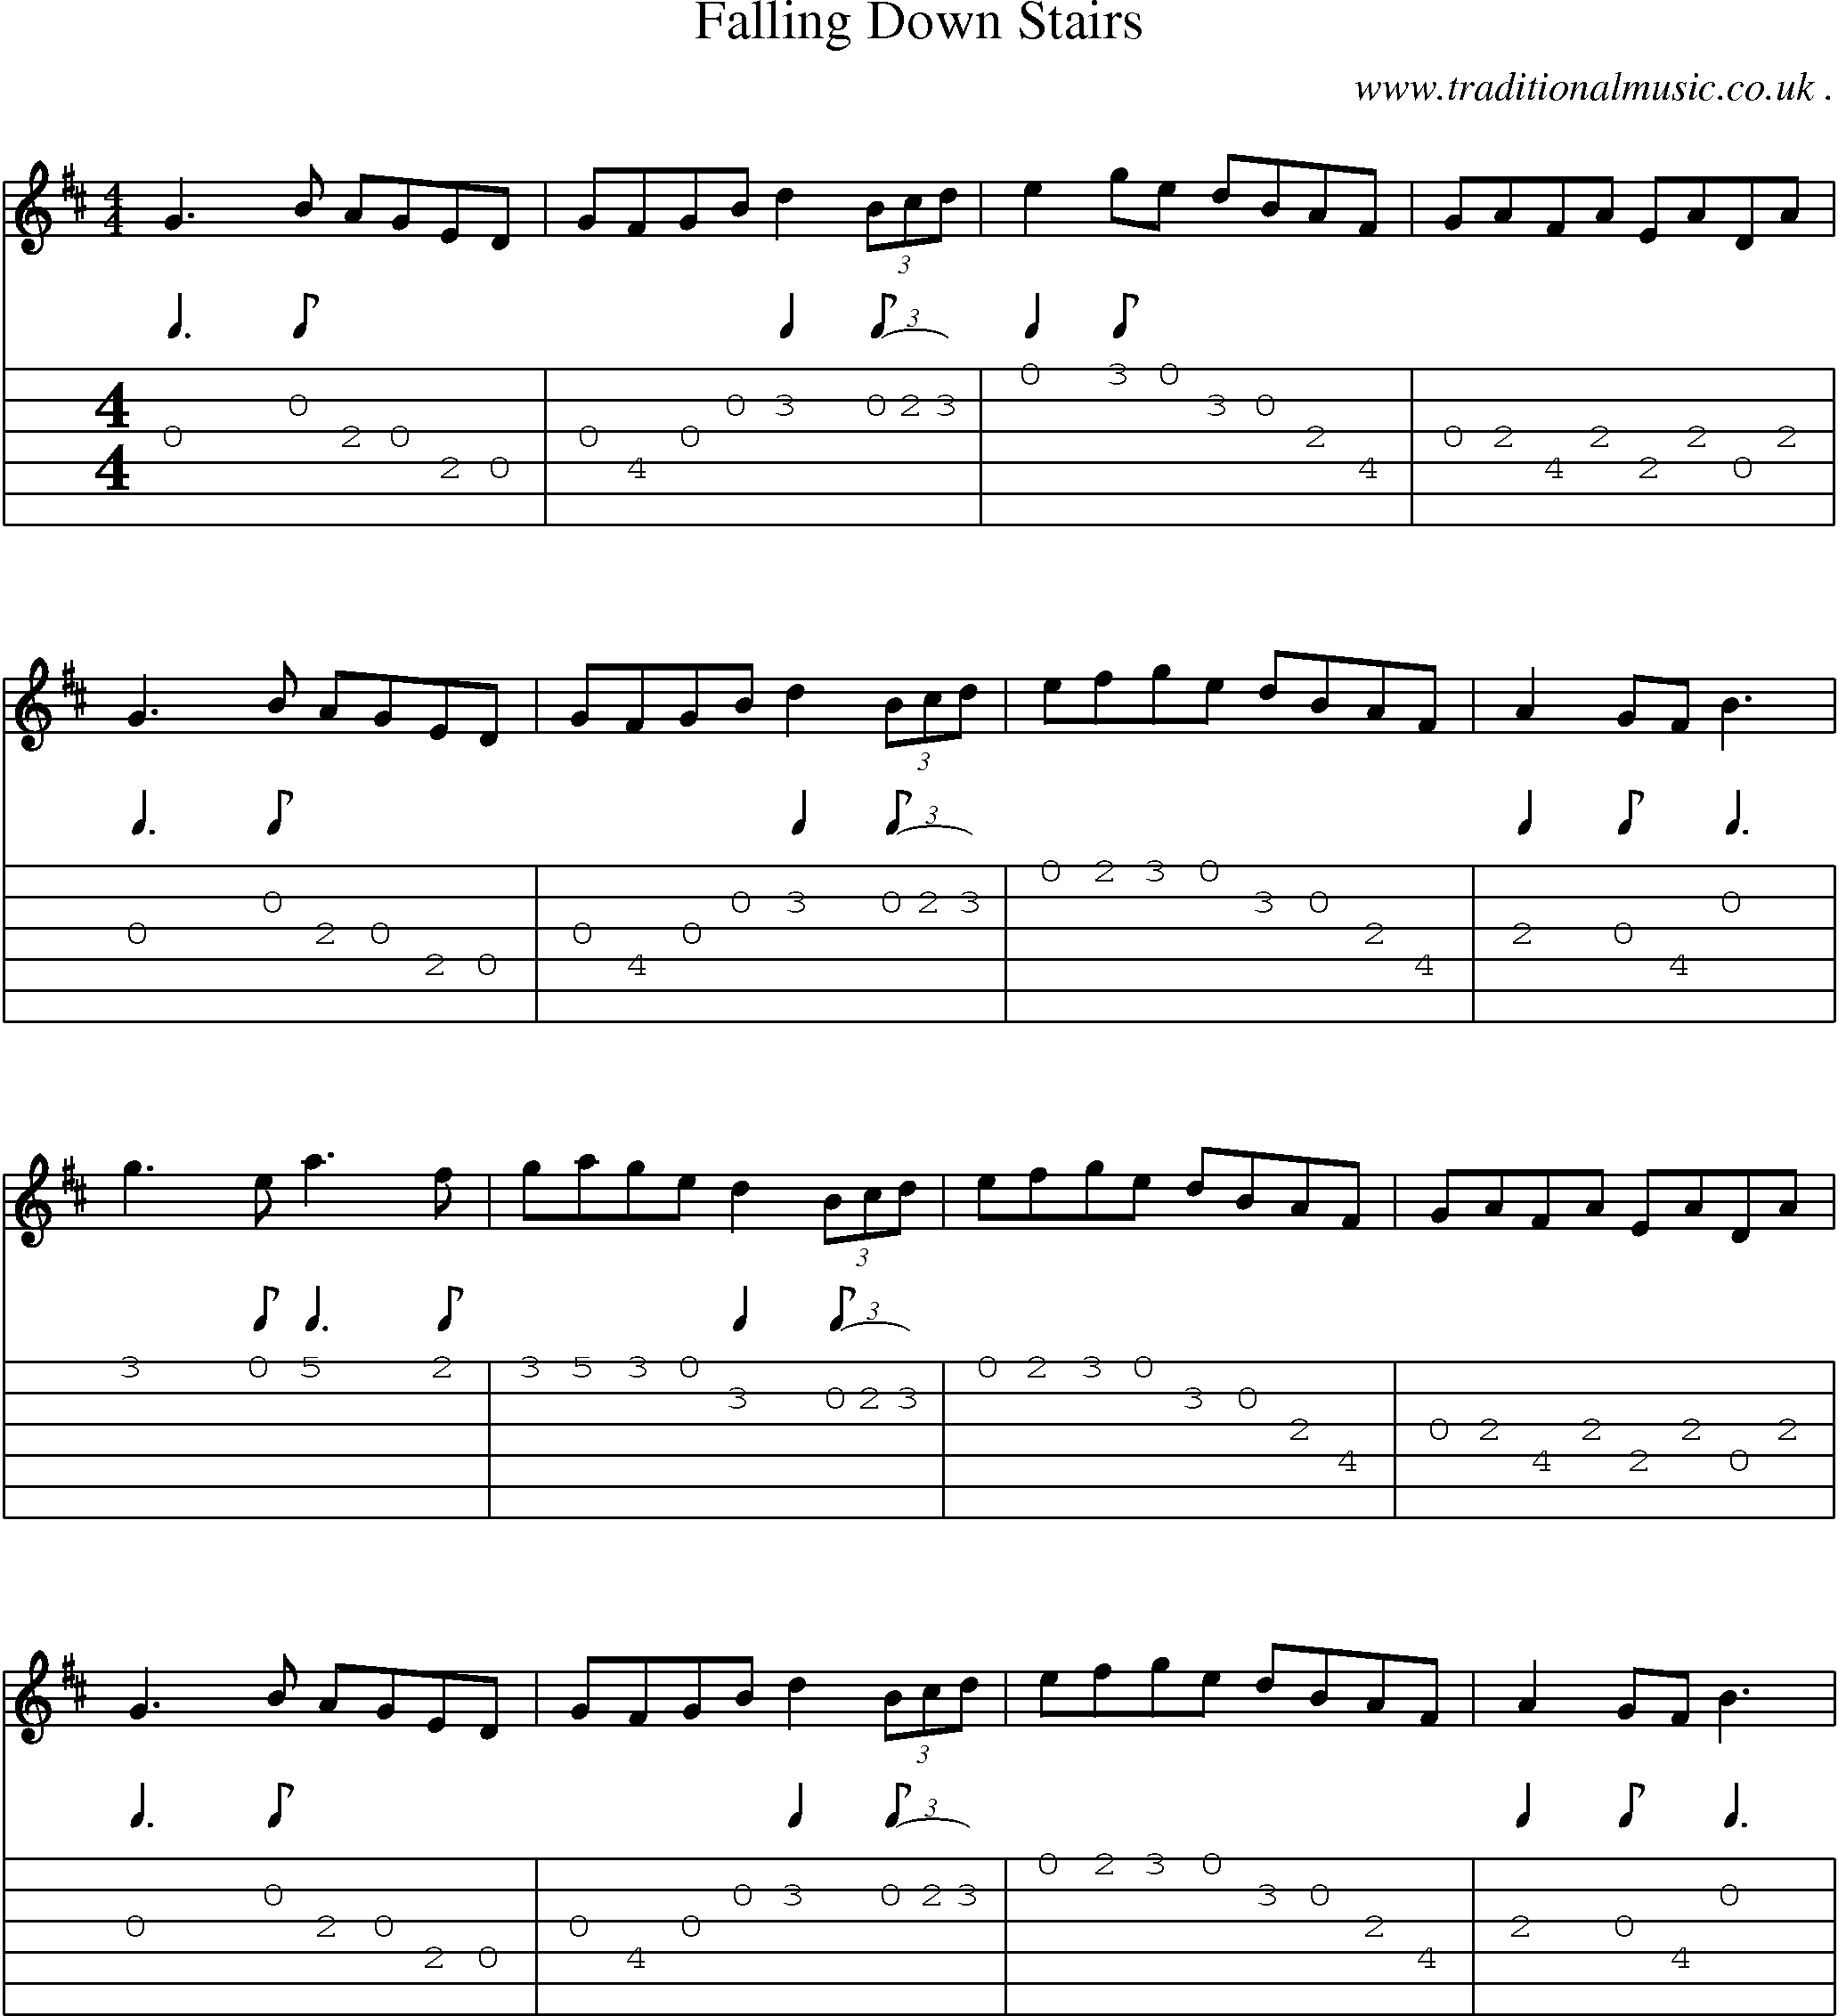 Sheet-Music and Guitar Tabs for Falling Down Stairs